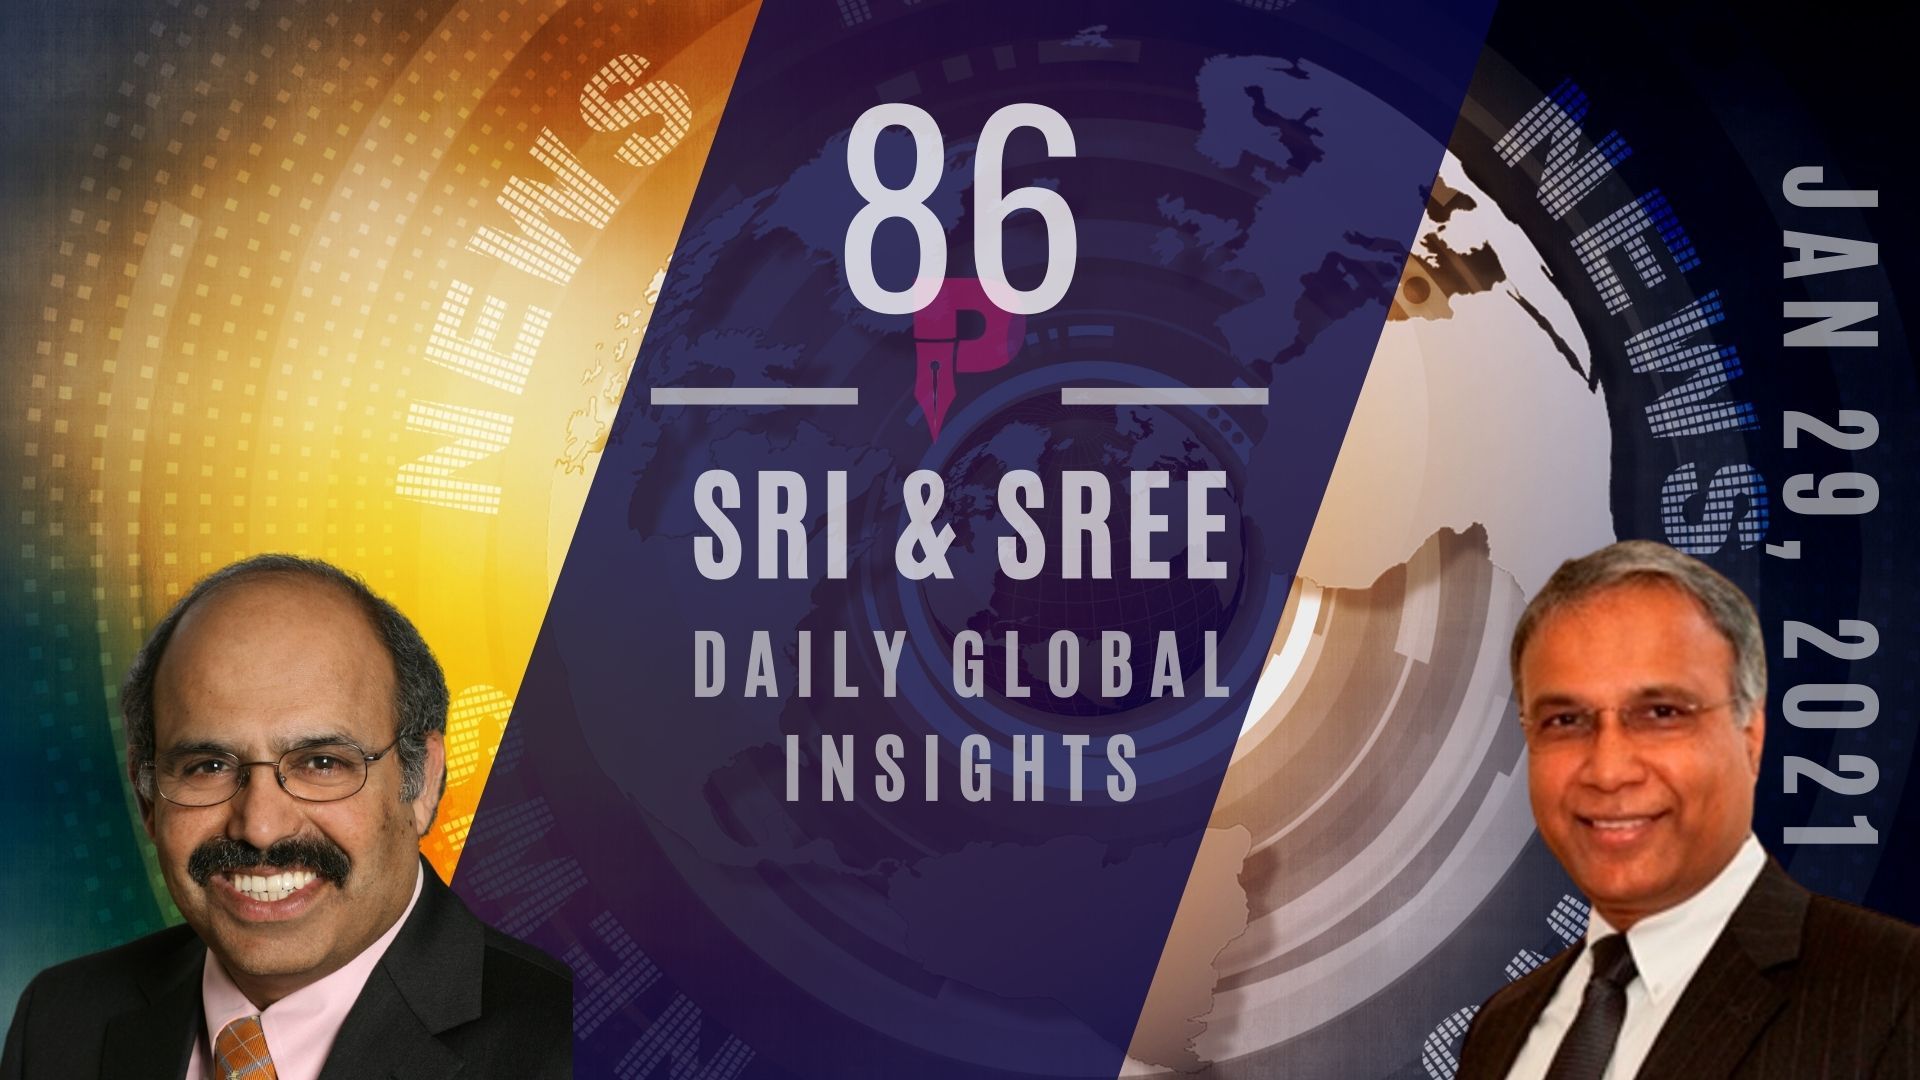 #DailyGlobalInsights #EP86 US changes mind on India in UNSC, US journo killer in Pak walks, Trump to stay in Party, China eyeing Pratas Island & more